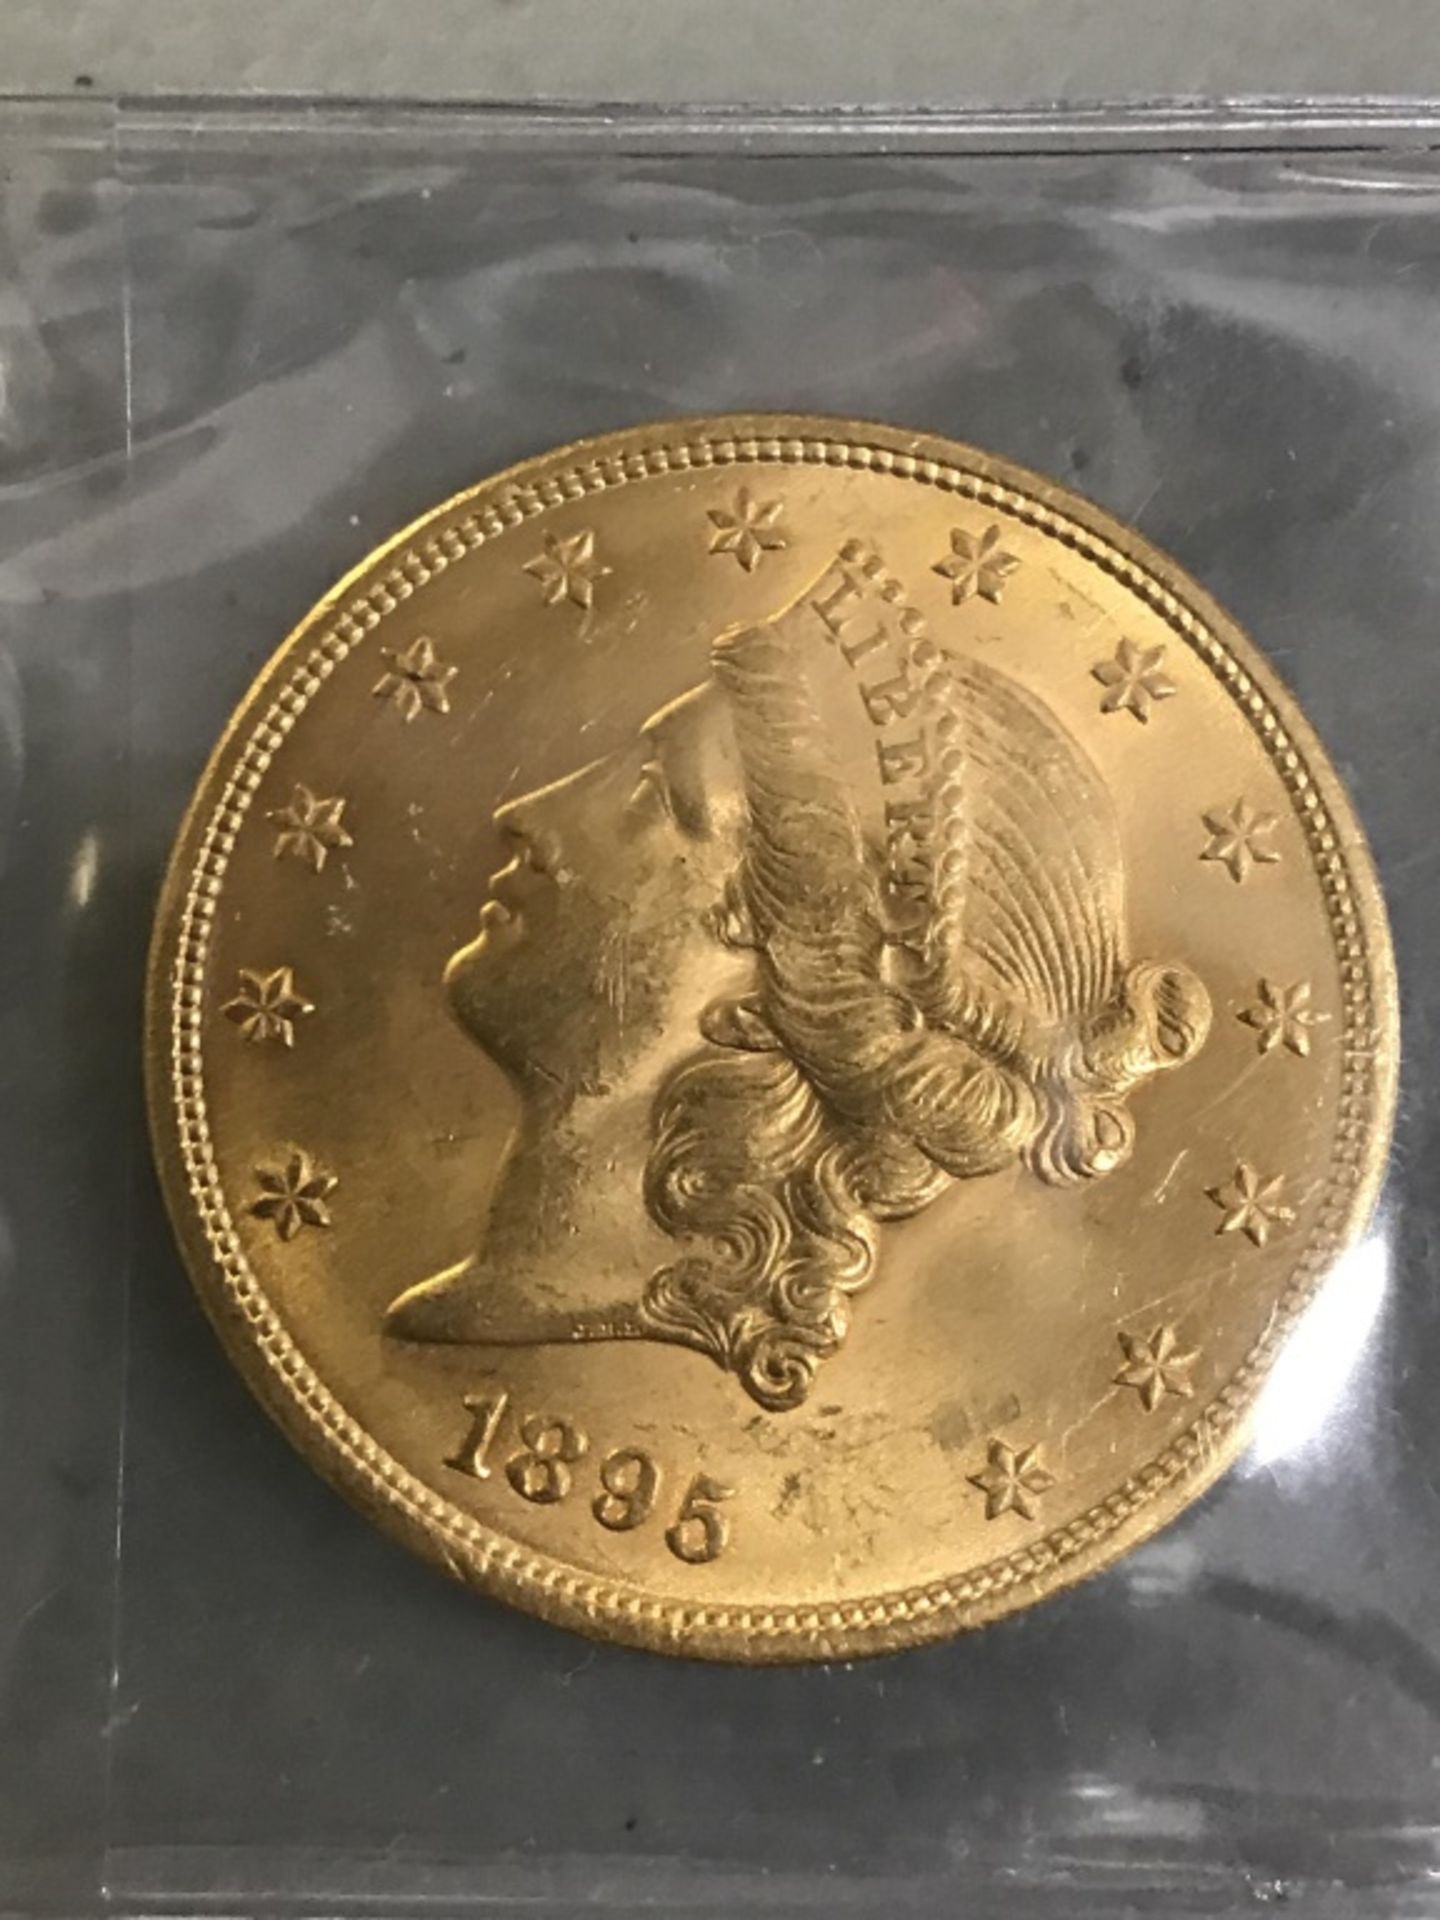 $20 US Gold 1895 Coin - Image 4 of 9